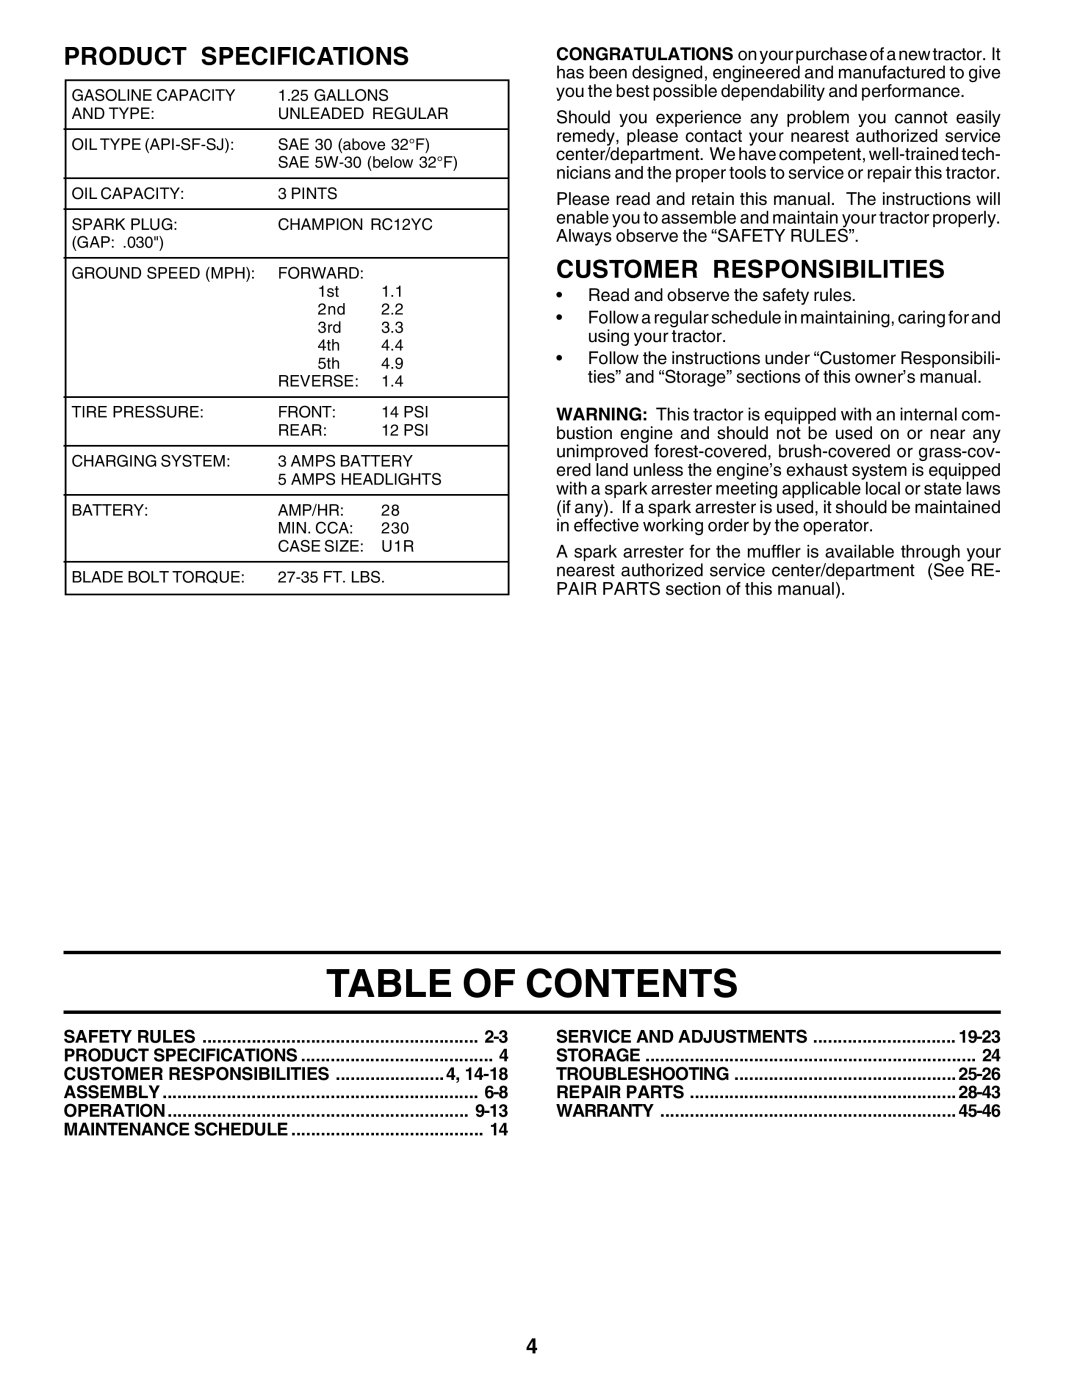 Poulan 183313 manual Table Of Contents, Product Specifications, Customer Responsibilities, 19-23, 25-26, 28-43, 9-13, 45-46 